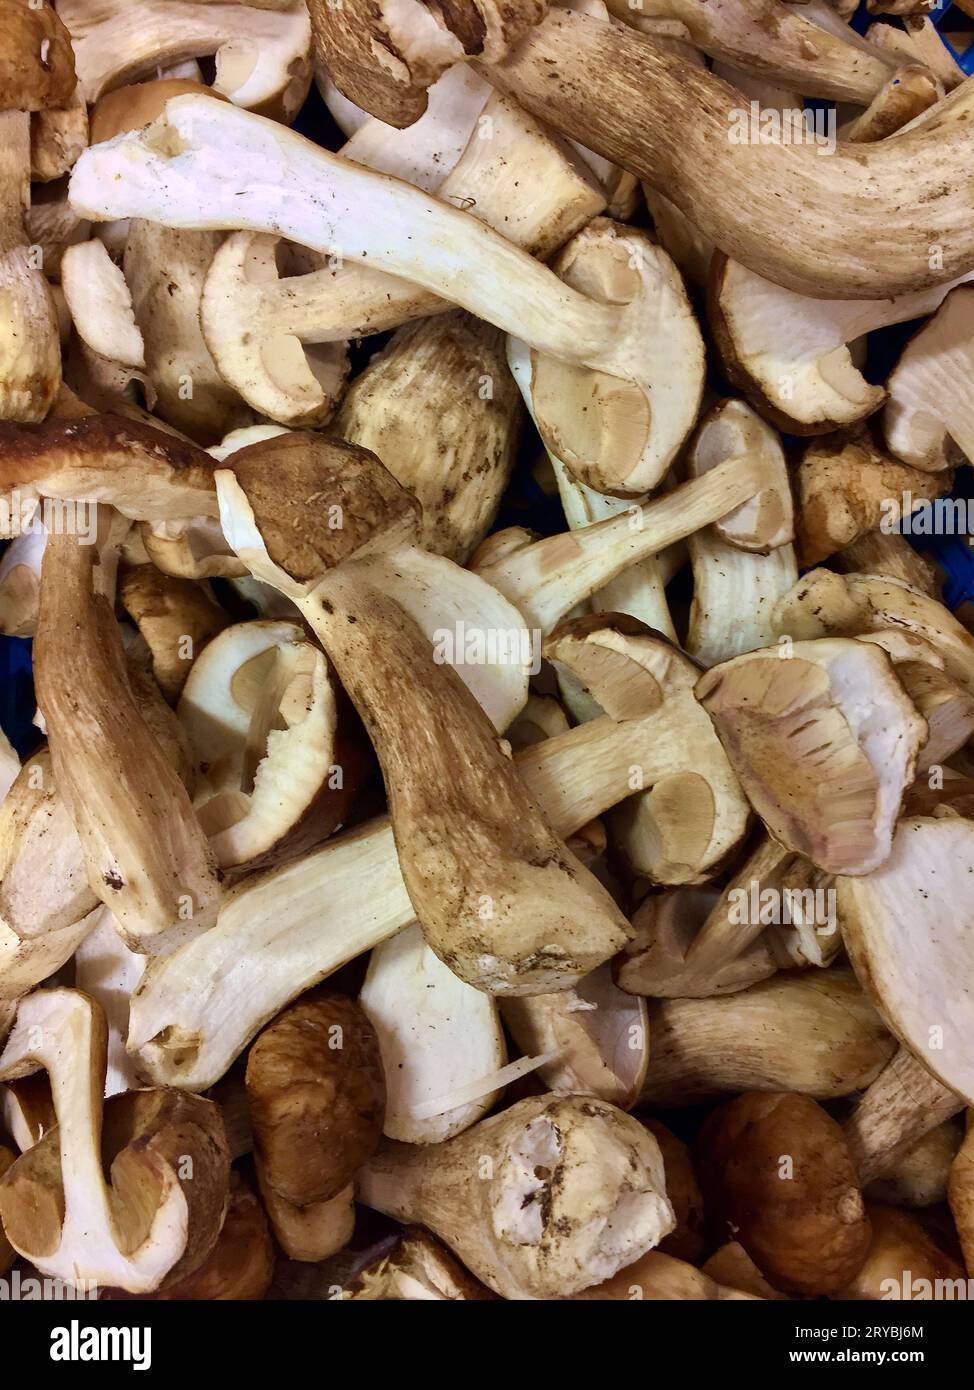 Heap with sliced fresh edible cep mushrooms ready for frying or to sell on the farmers market. Stock Photo